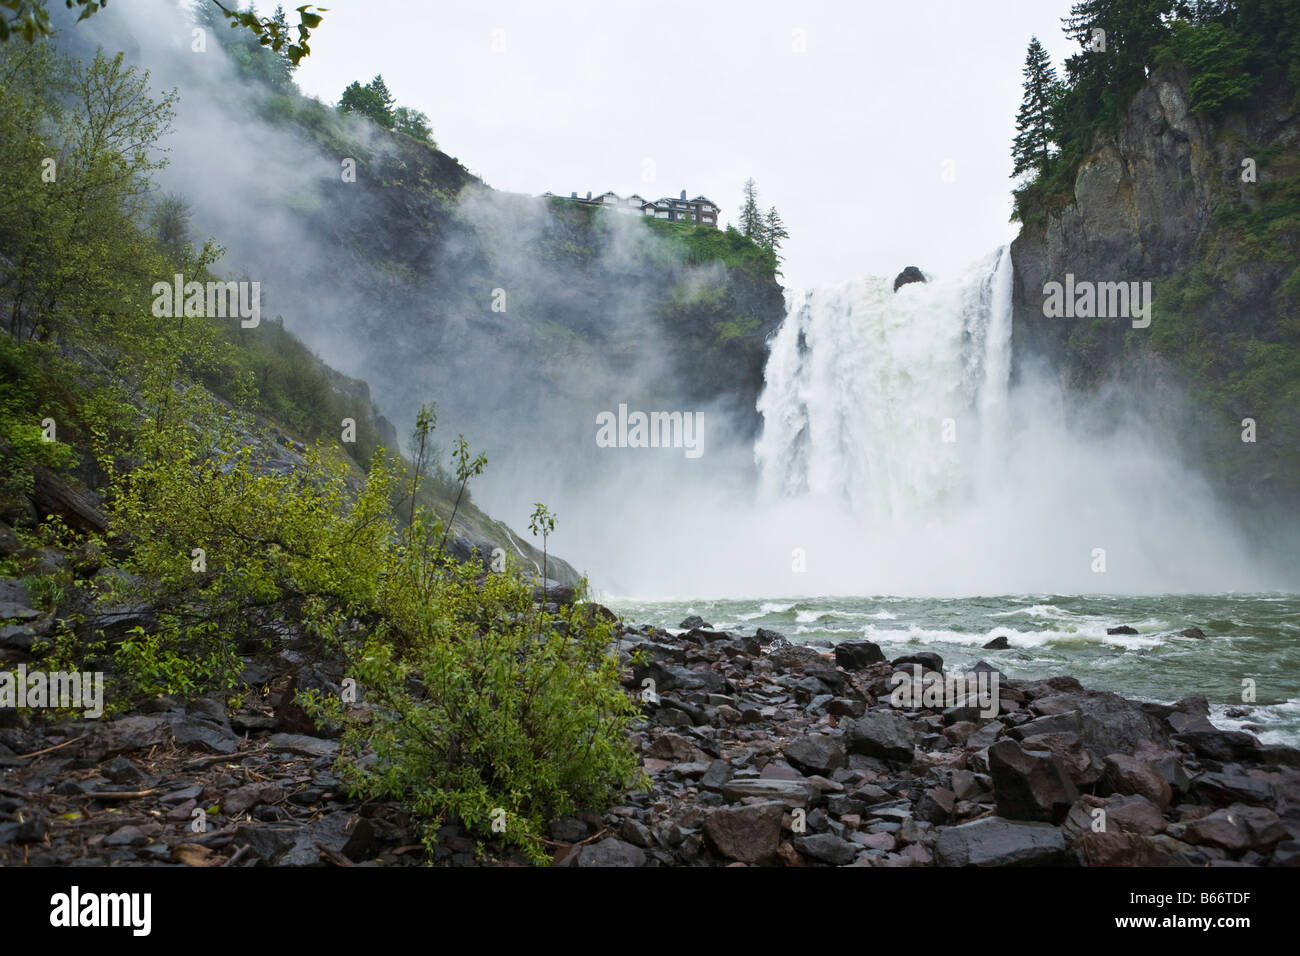 The Salish Lodge on the cliffs overlooking Snoqualmie Falls WA Stock Photo